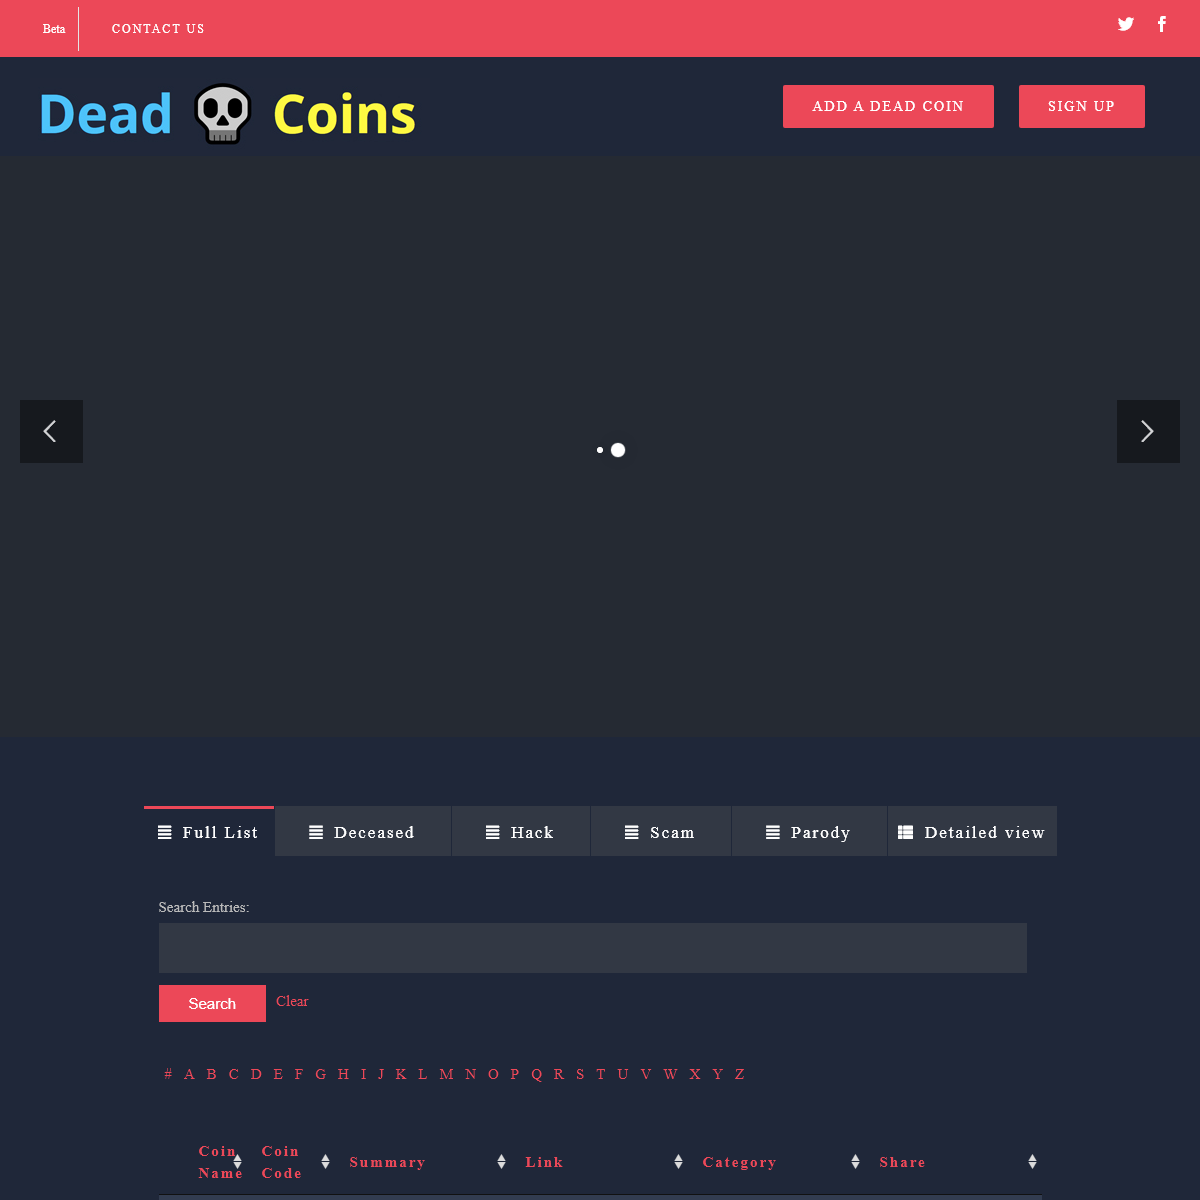 A complete backup of deadcoins.com